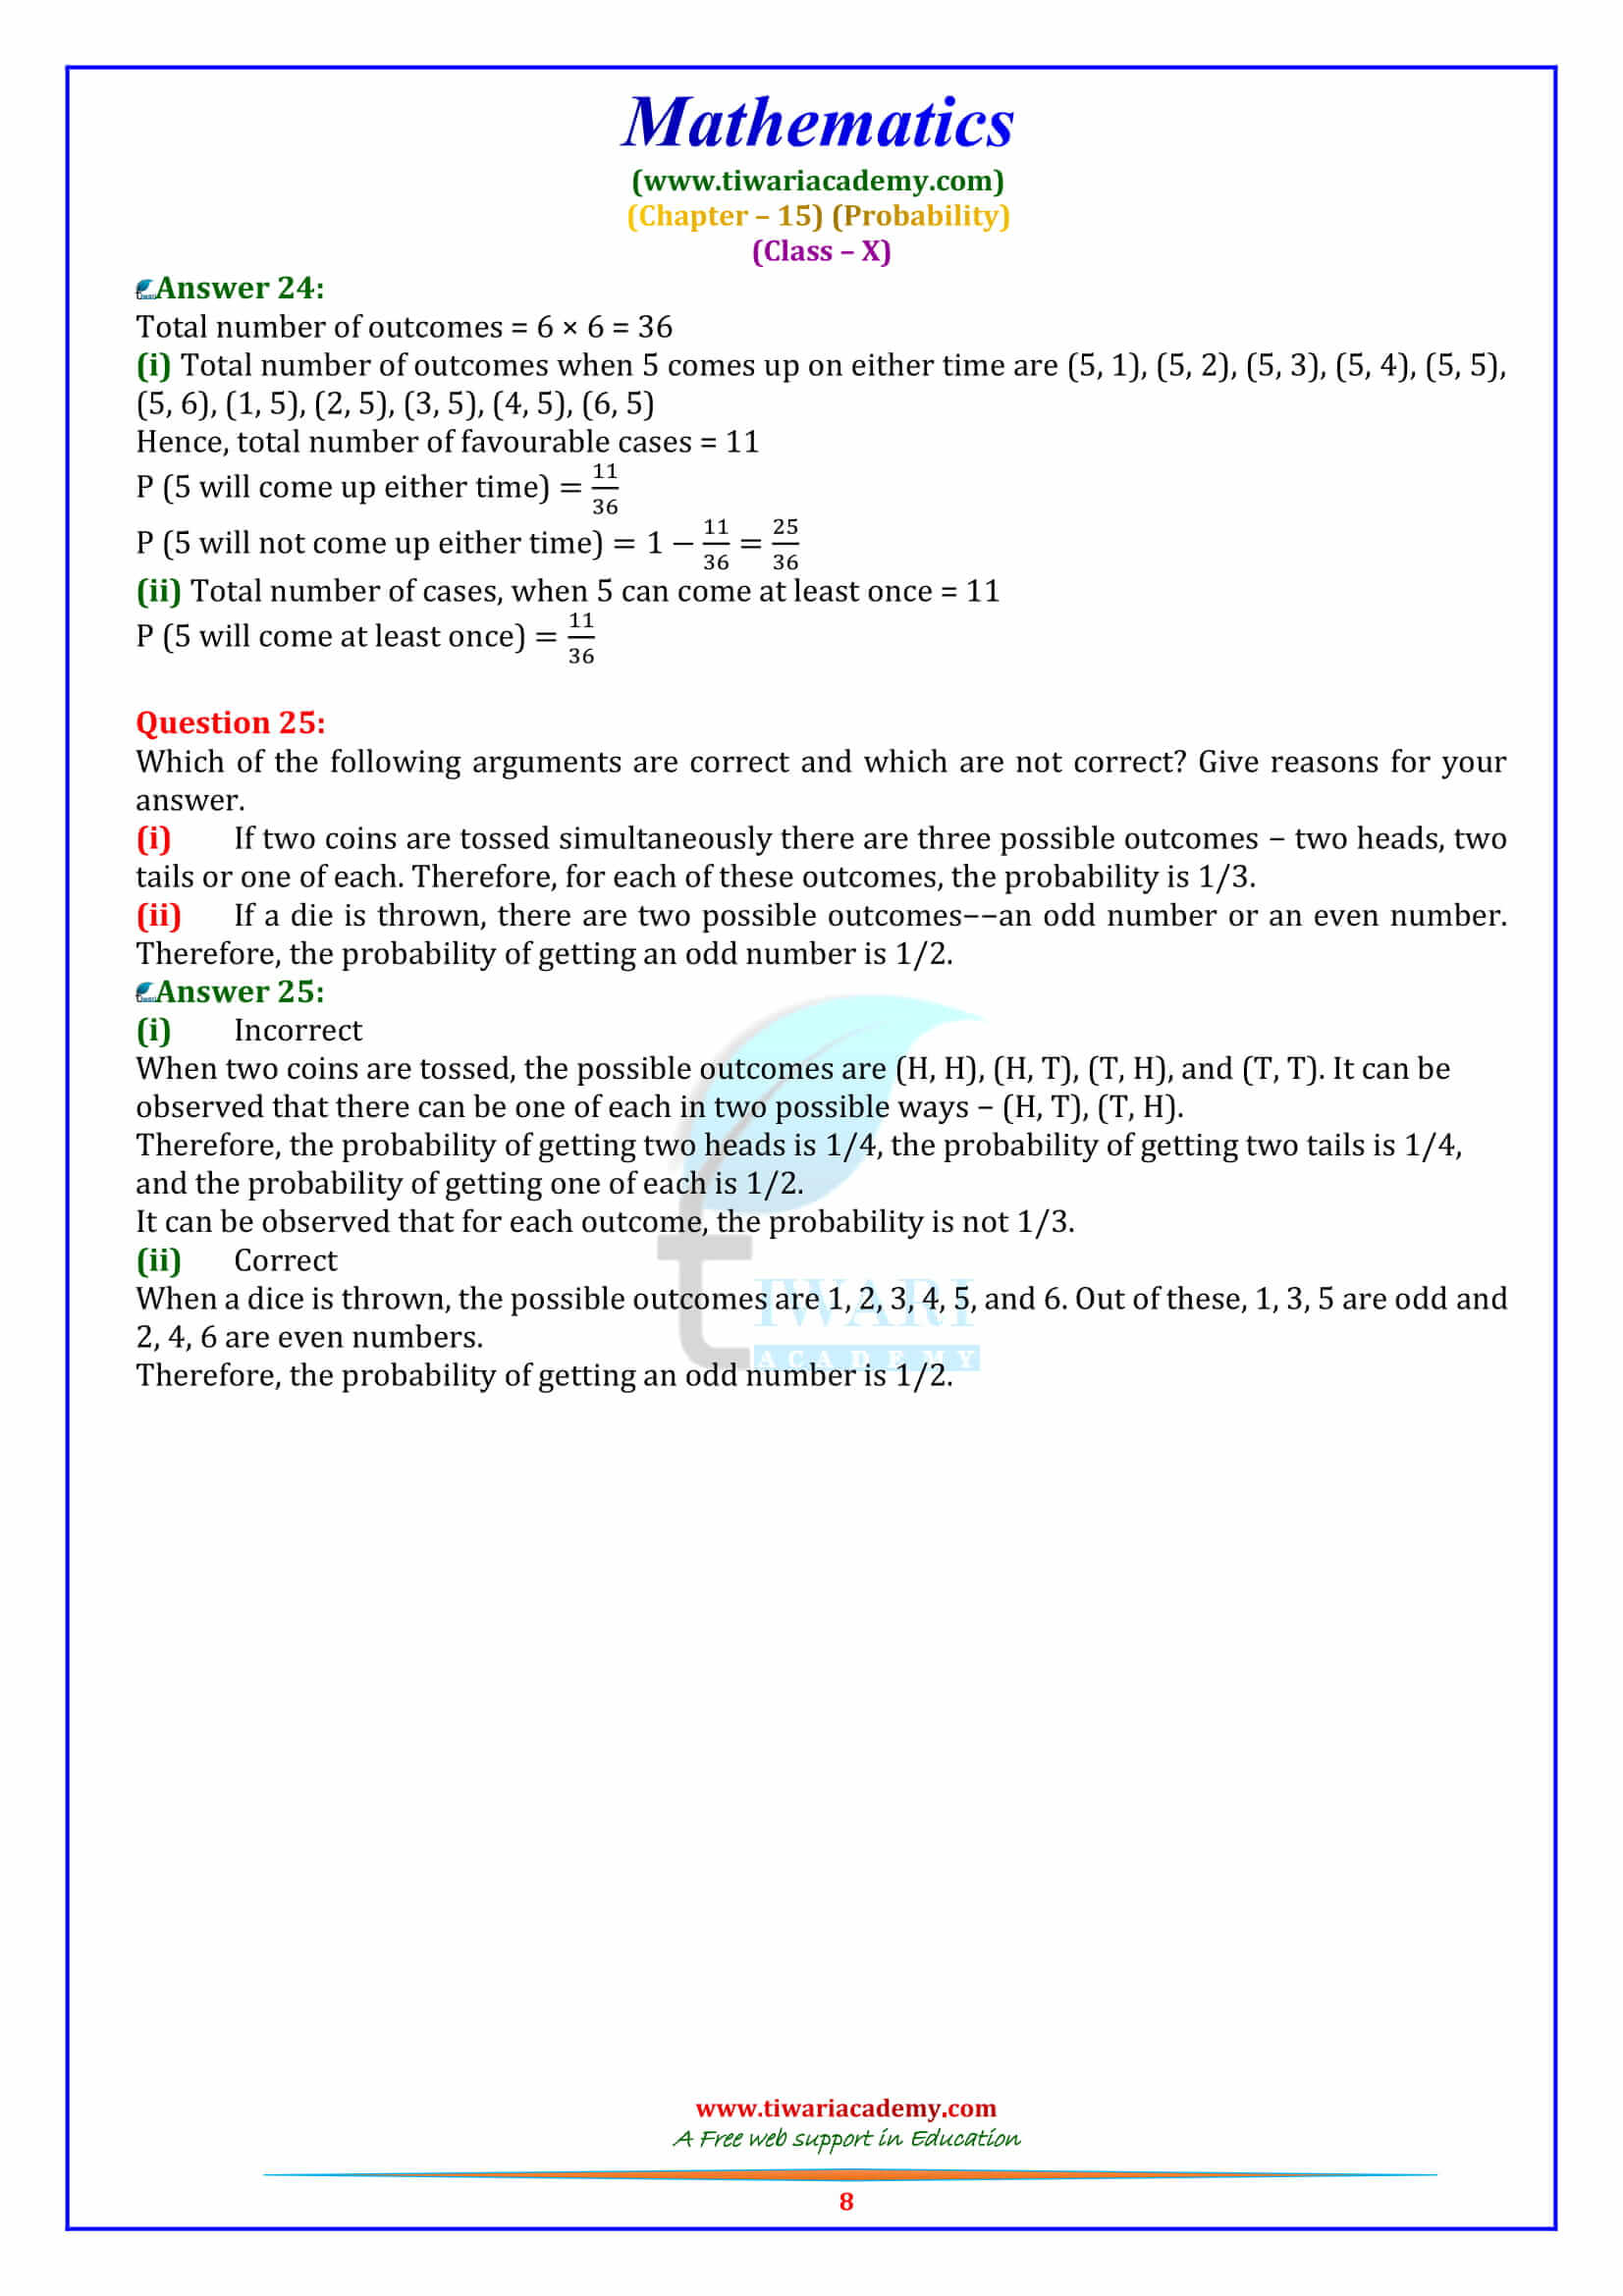 NCERT Solutions for Class 10 Maths Chapter 15 Exercise 15.1 updated for 2018-19 up board